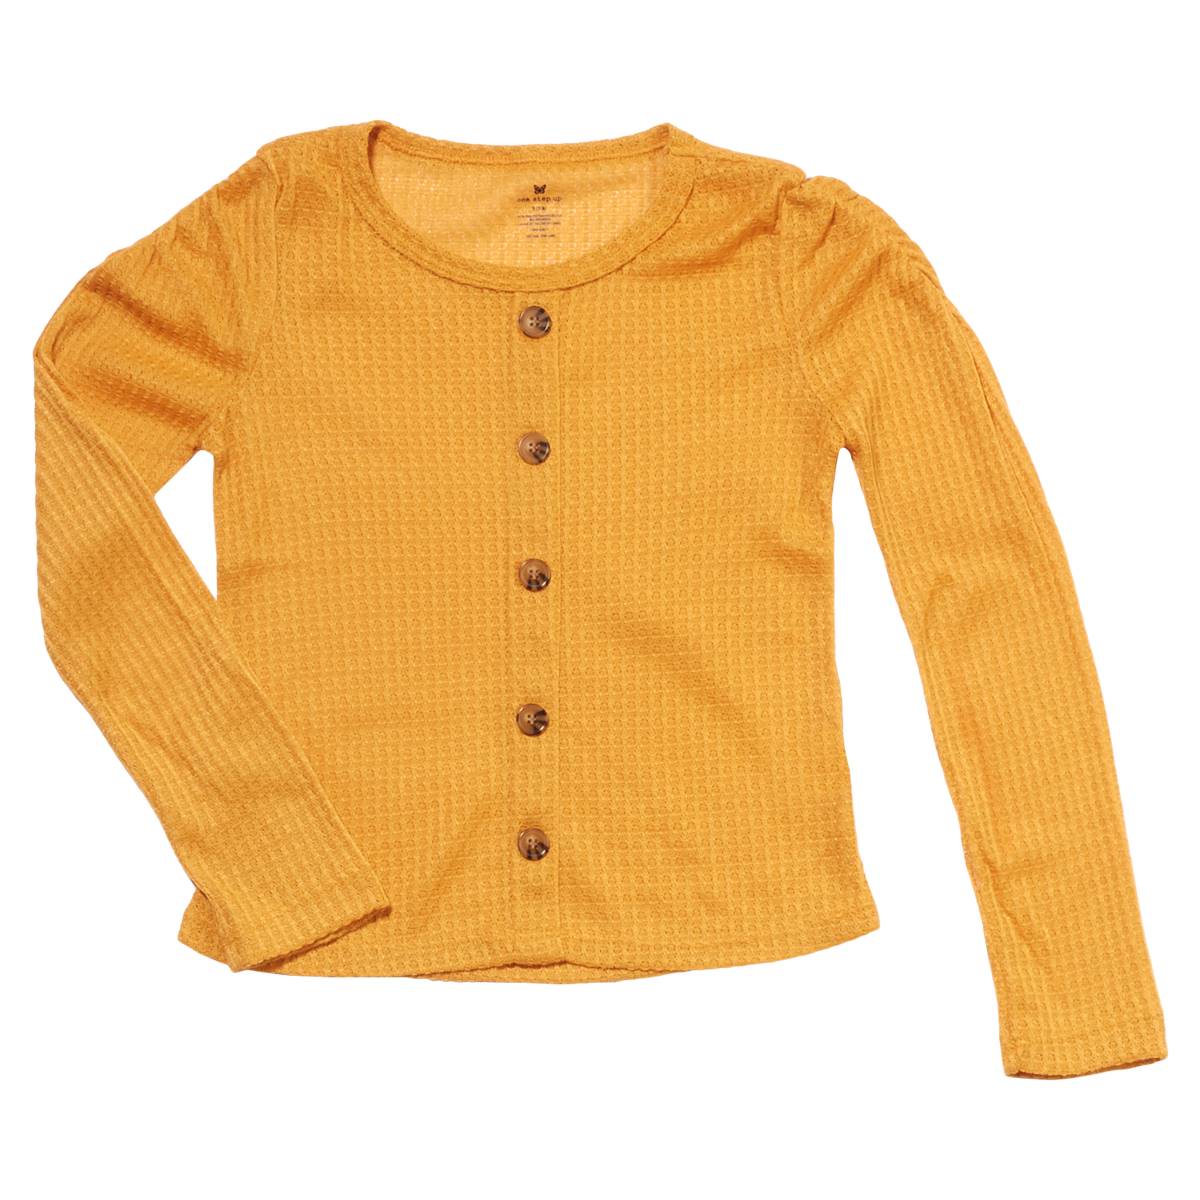 Girls (7-16) One Step Up Solid Waffle Top W/ Caterpillar Shoulder